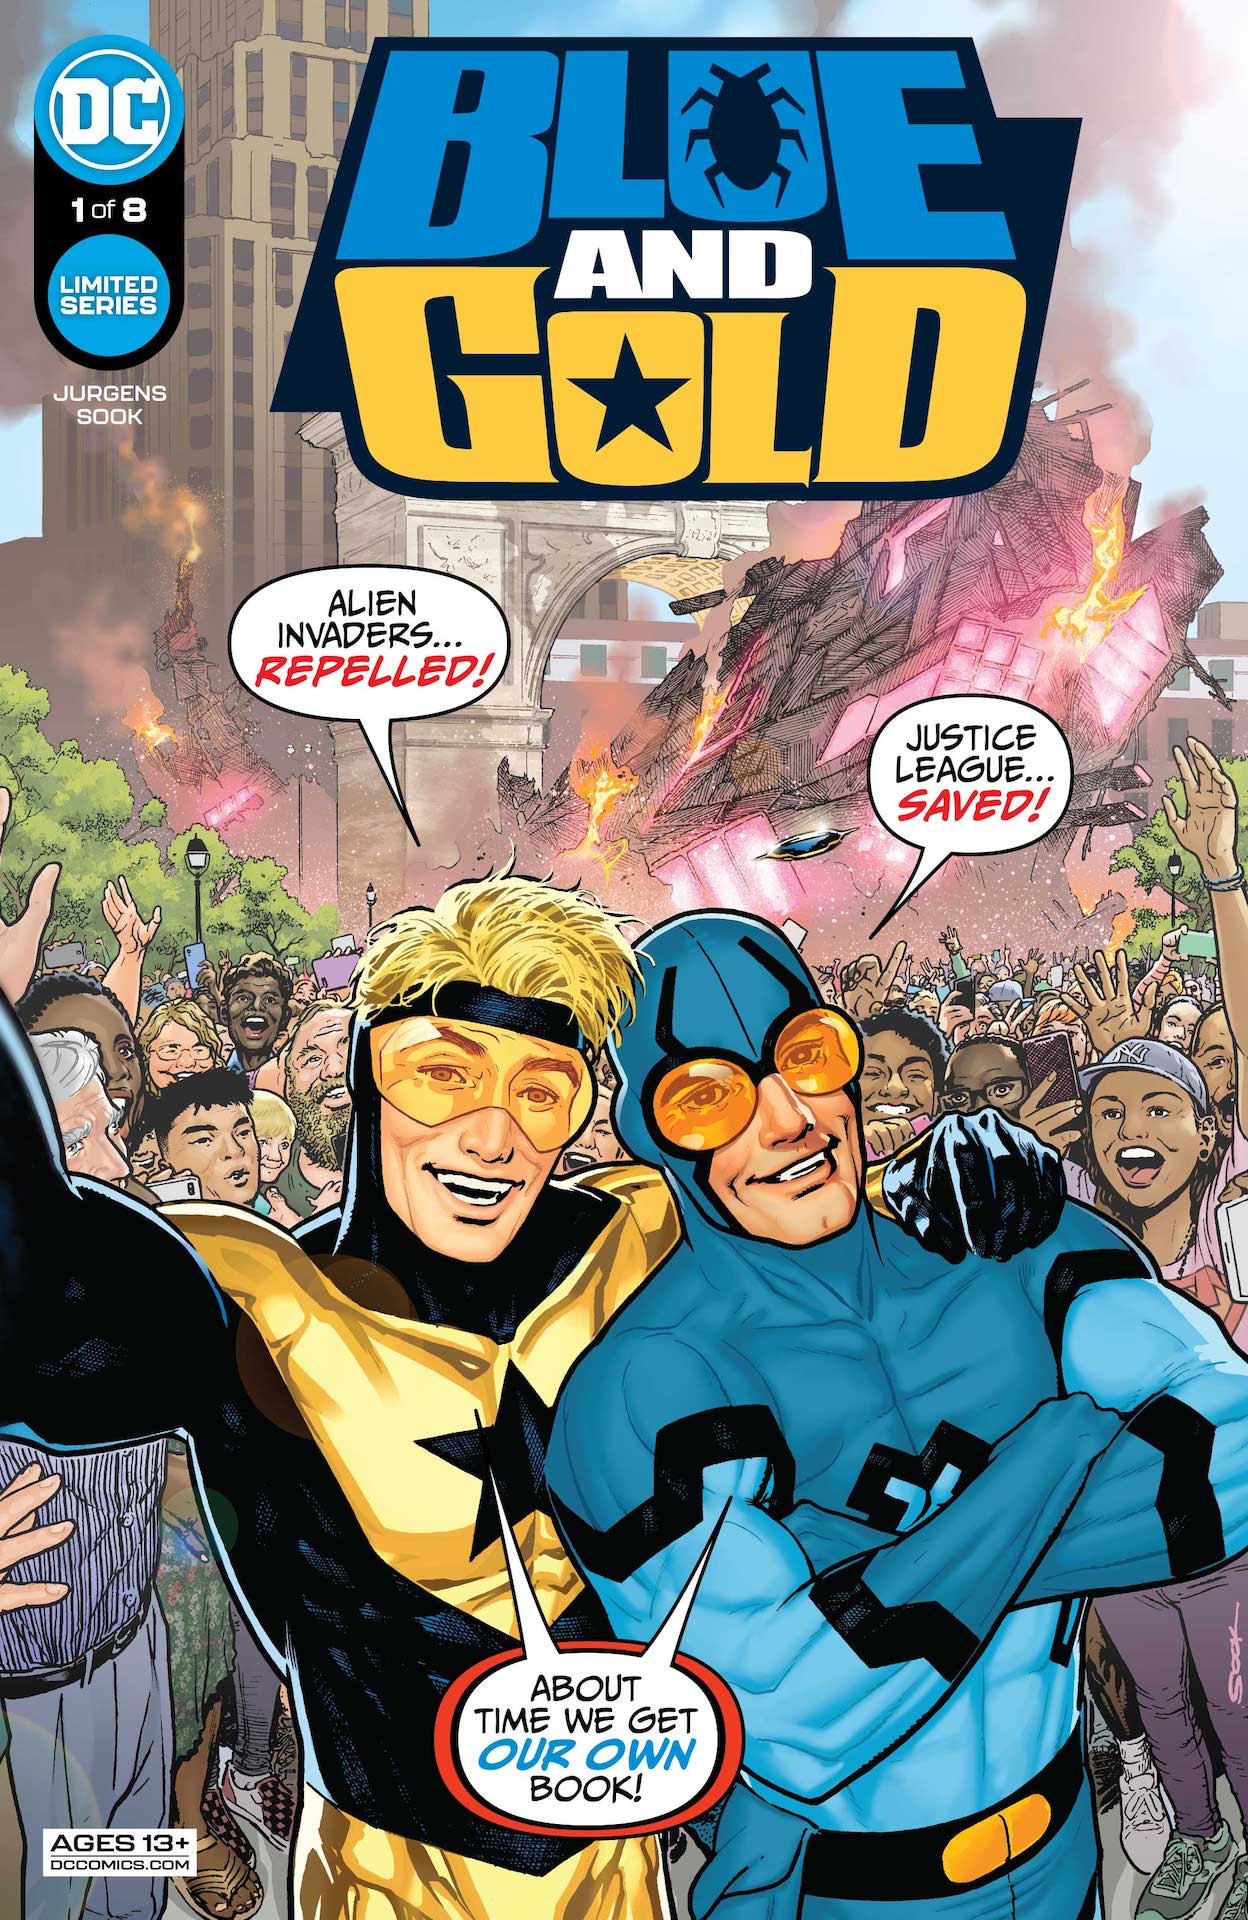 DC Preview: Blue & Gold #1